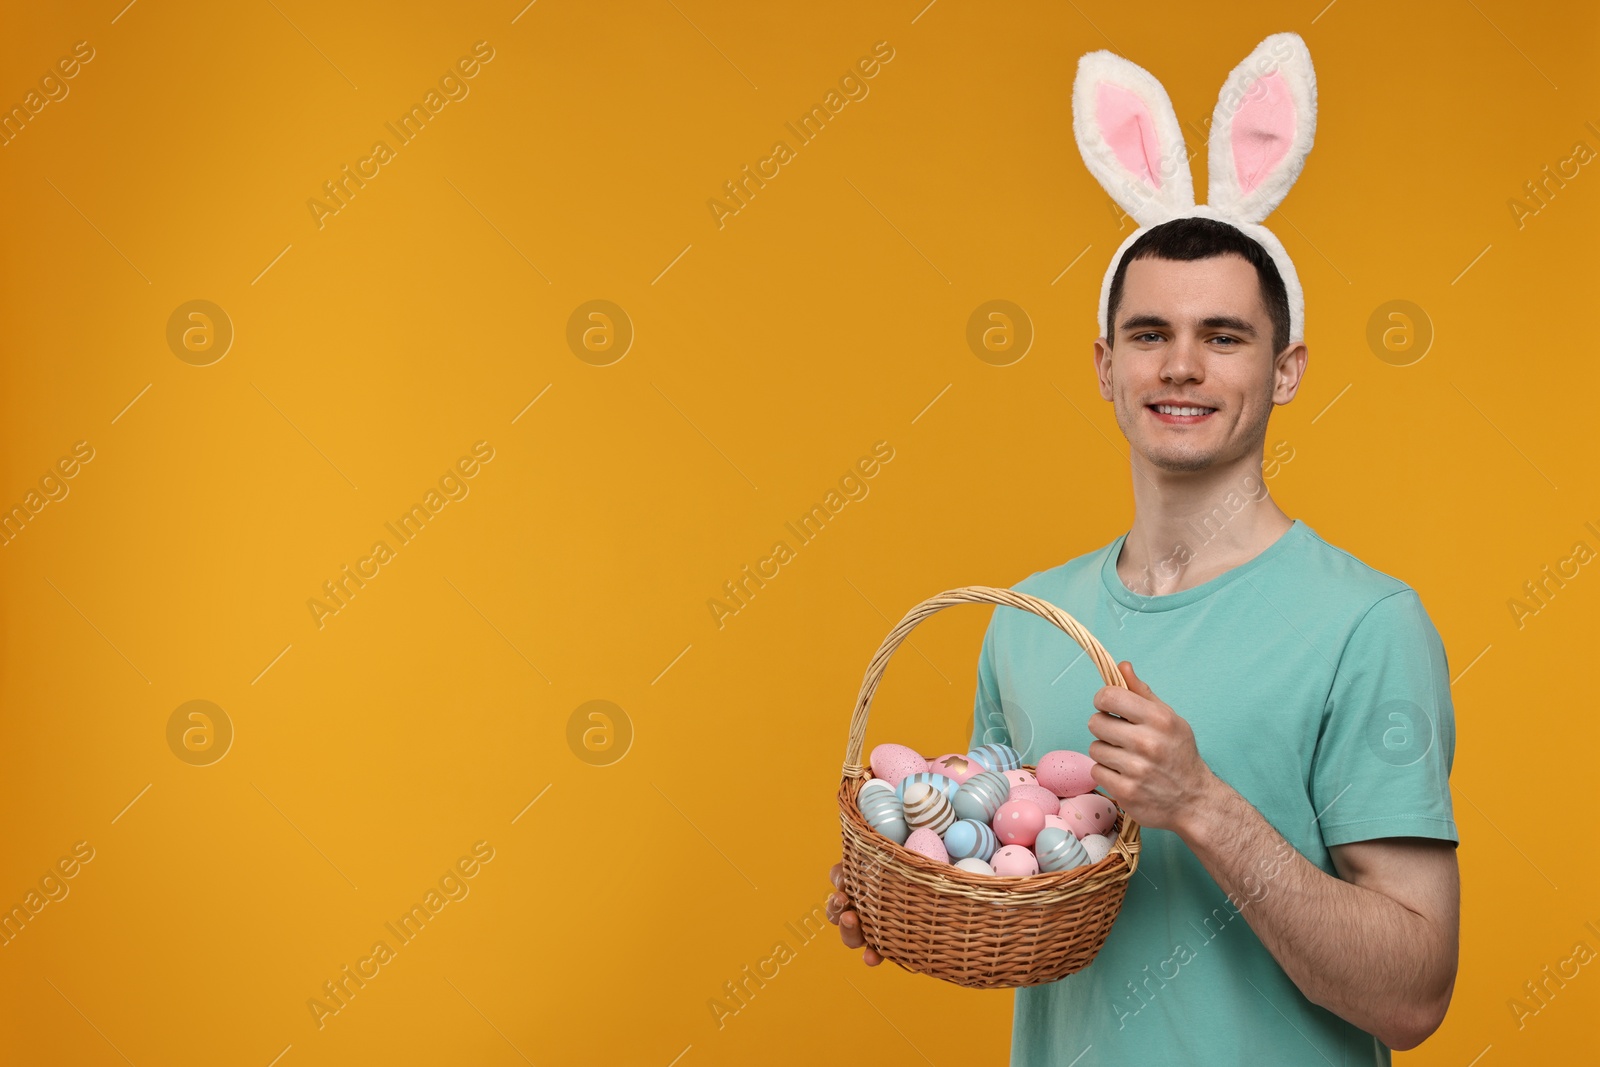 Photo of Easter celebration. Handsome young man with bunny ears holding basket of painted eggs on orange background. Space for text